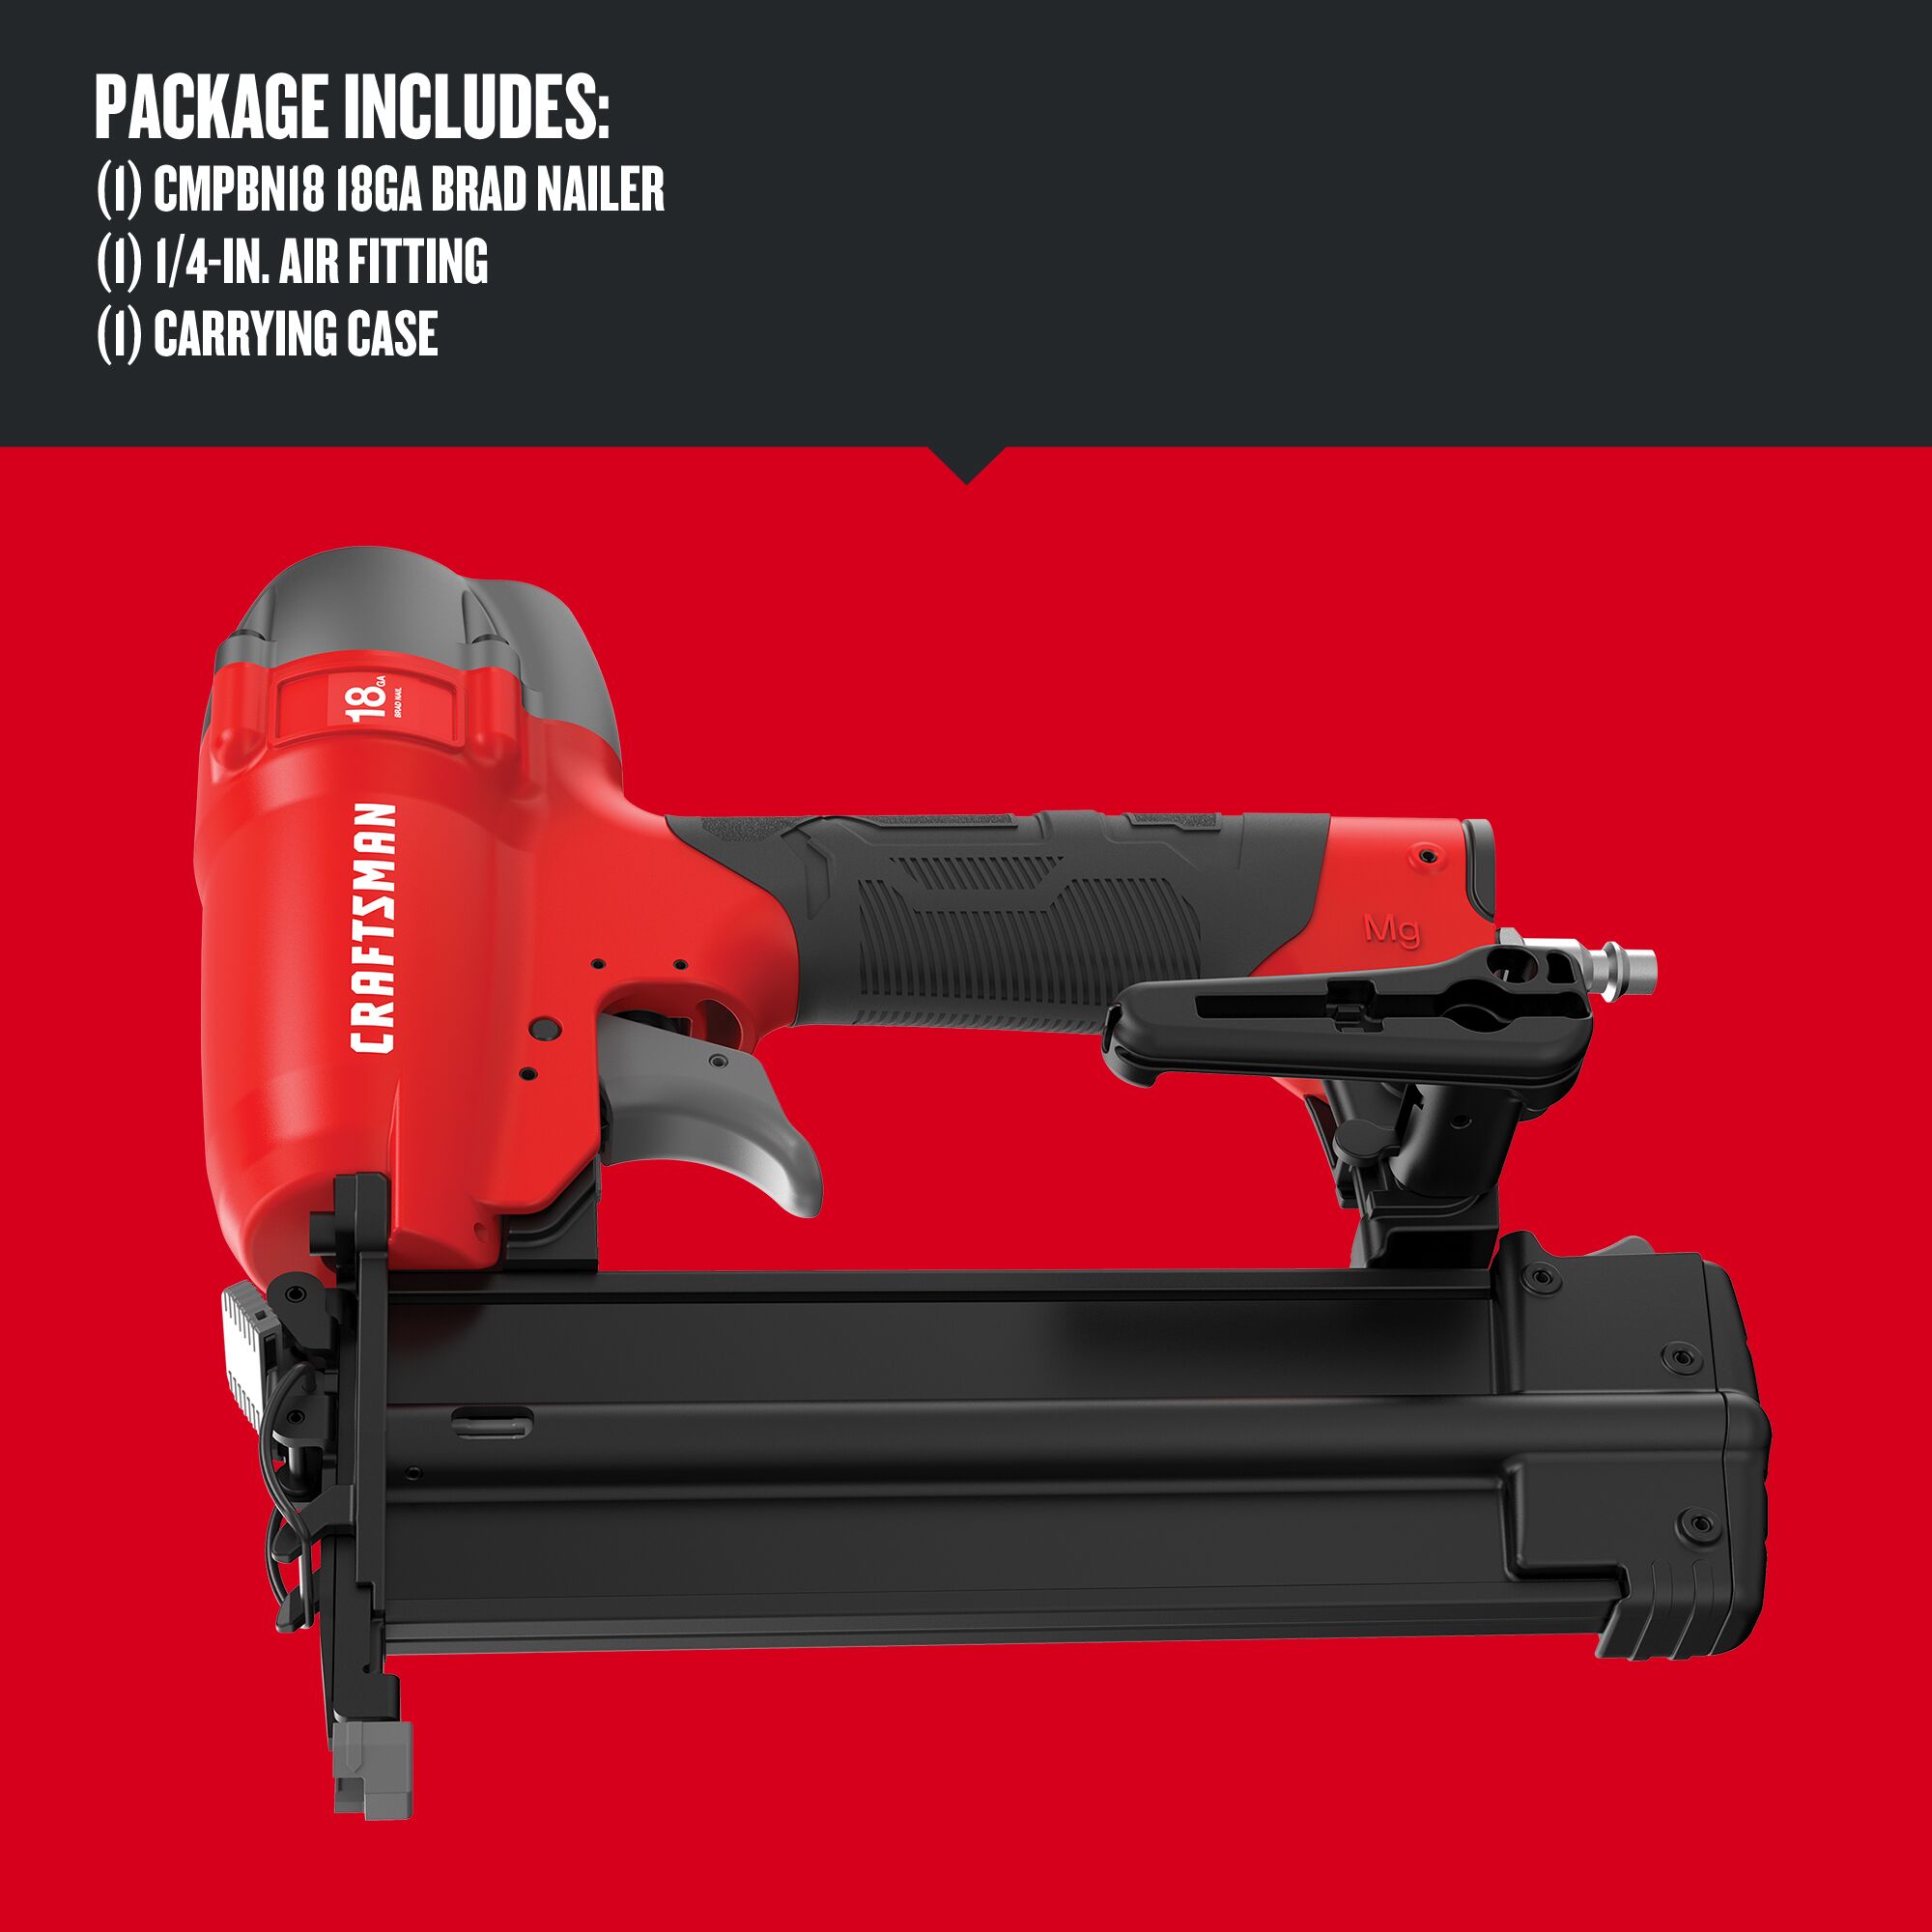 Graphic of CRAFTSMAN Nailer: Finishing highlighting product features